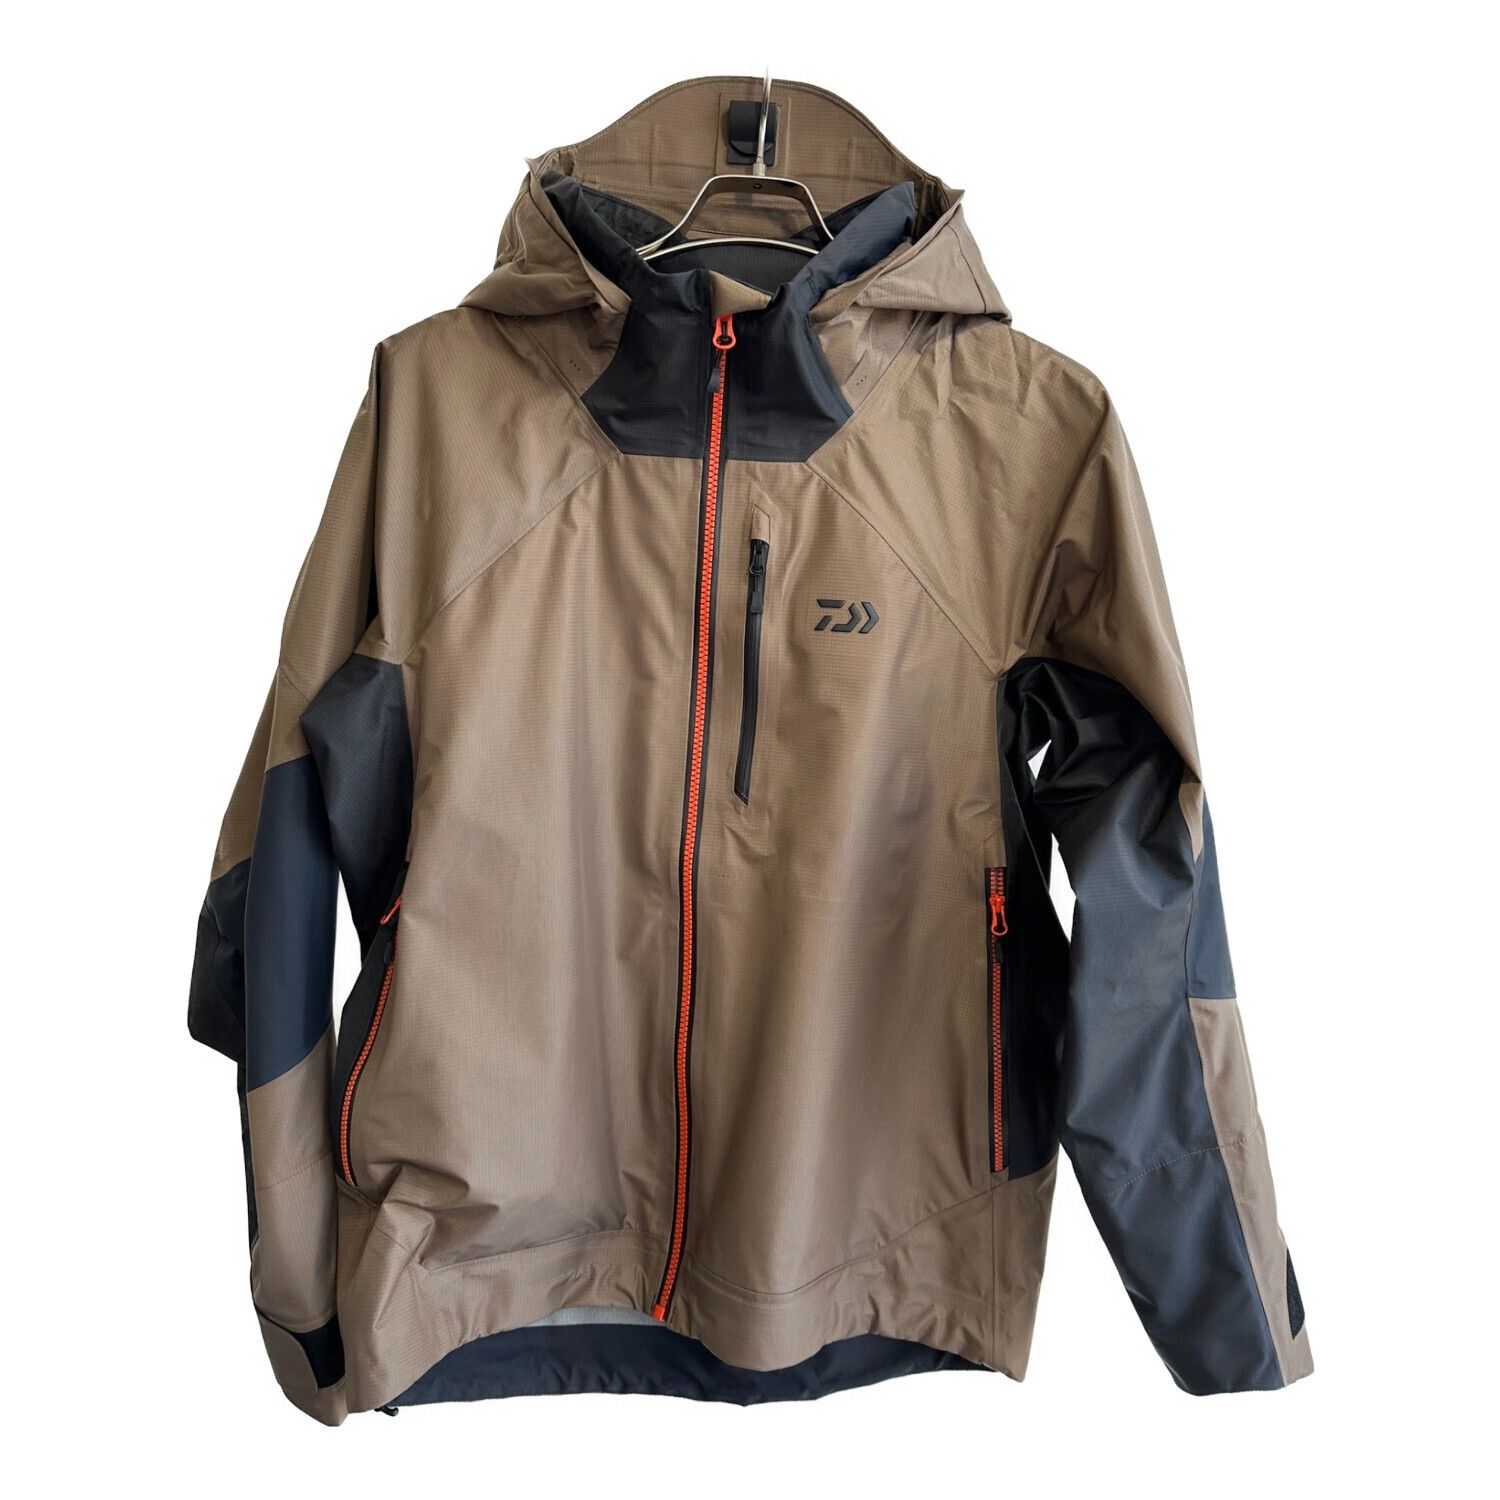 OUTDOOOUTDOOR RESEARCH Foray Jacket 未使用新品　コヨーテ